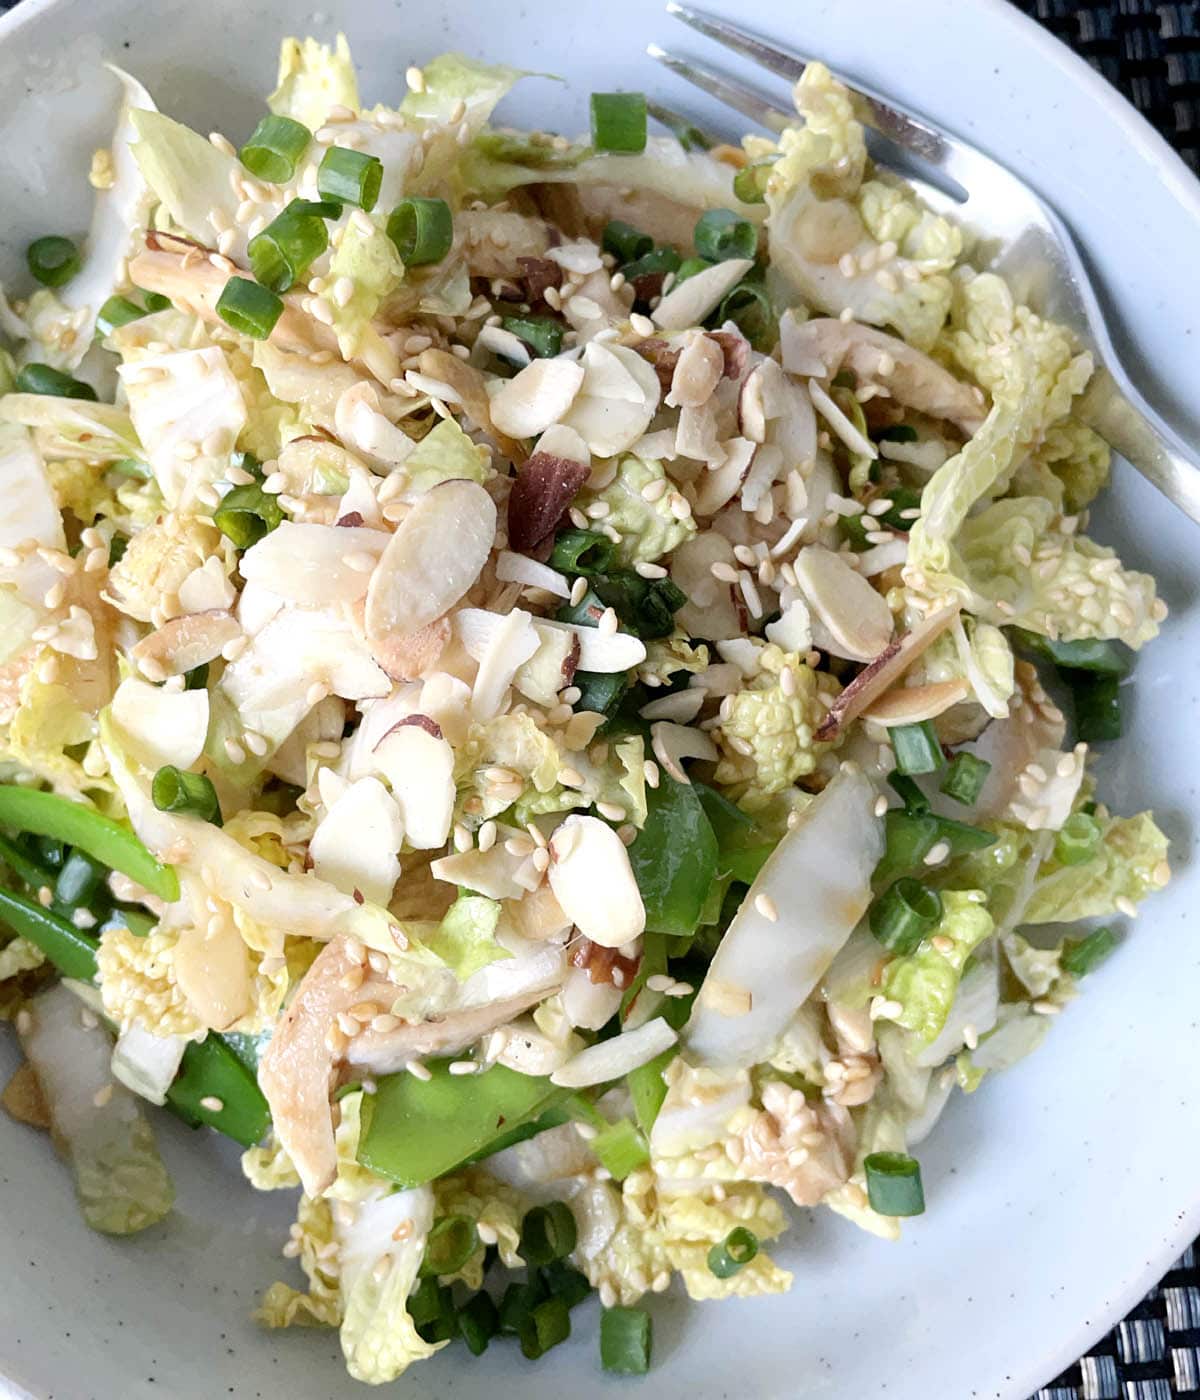 A round white plate containing chicken salad with cabbage and sliced almonds.